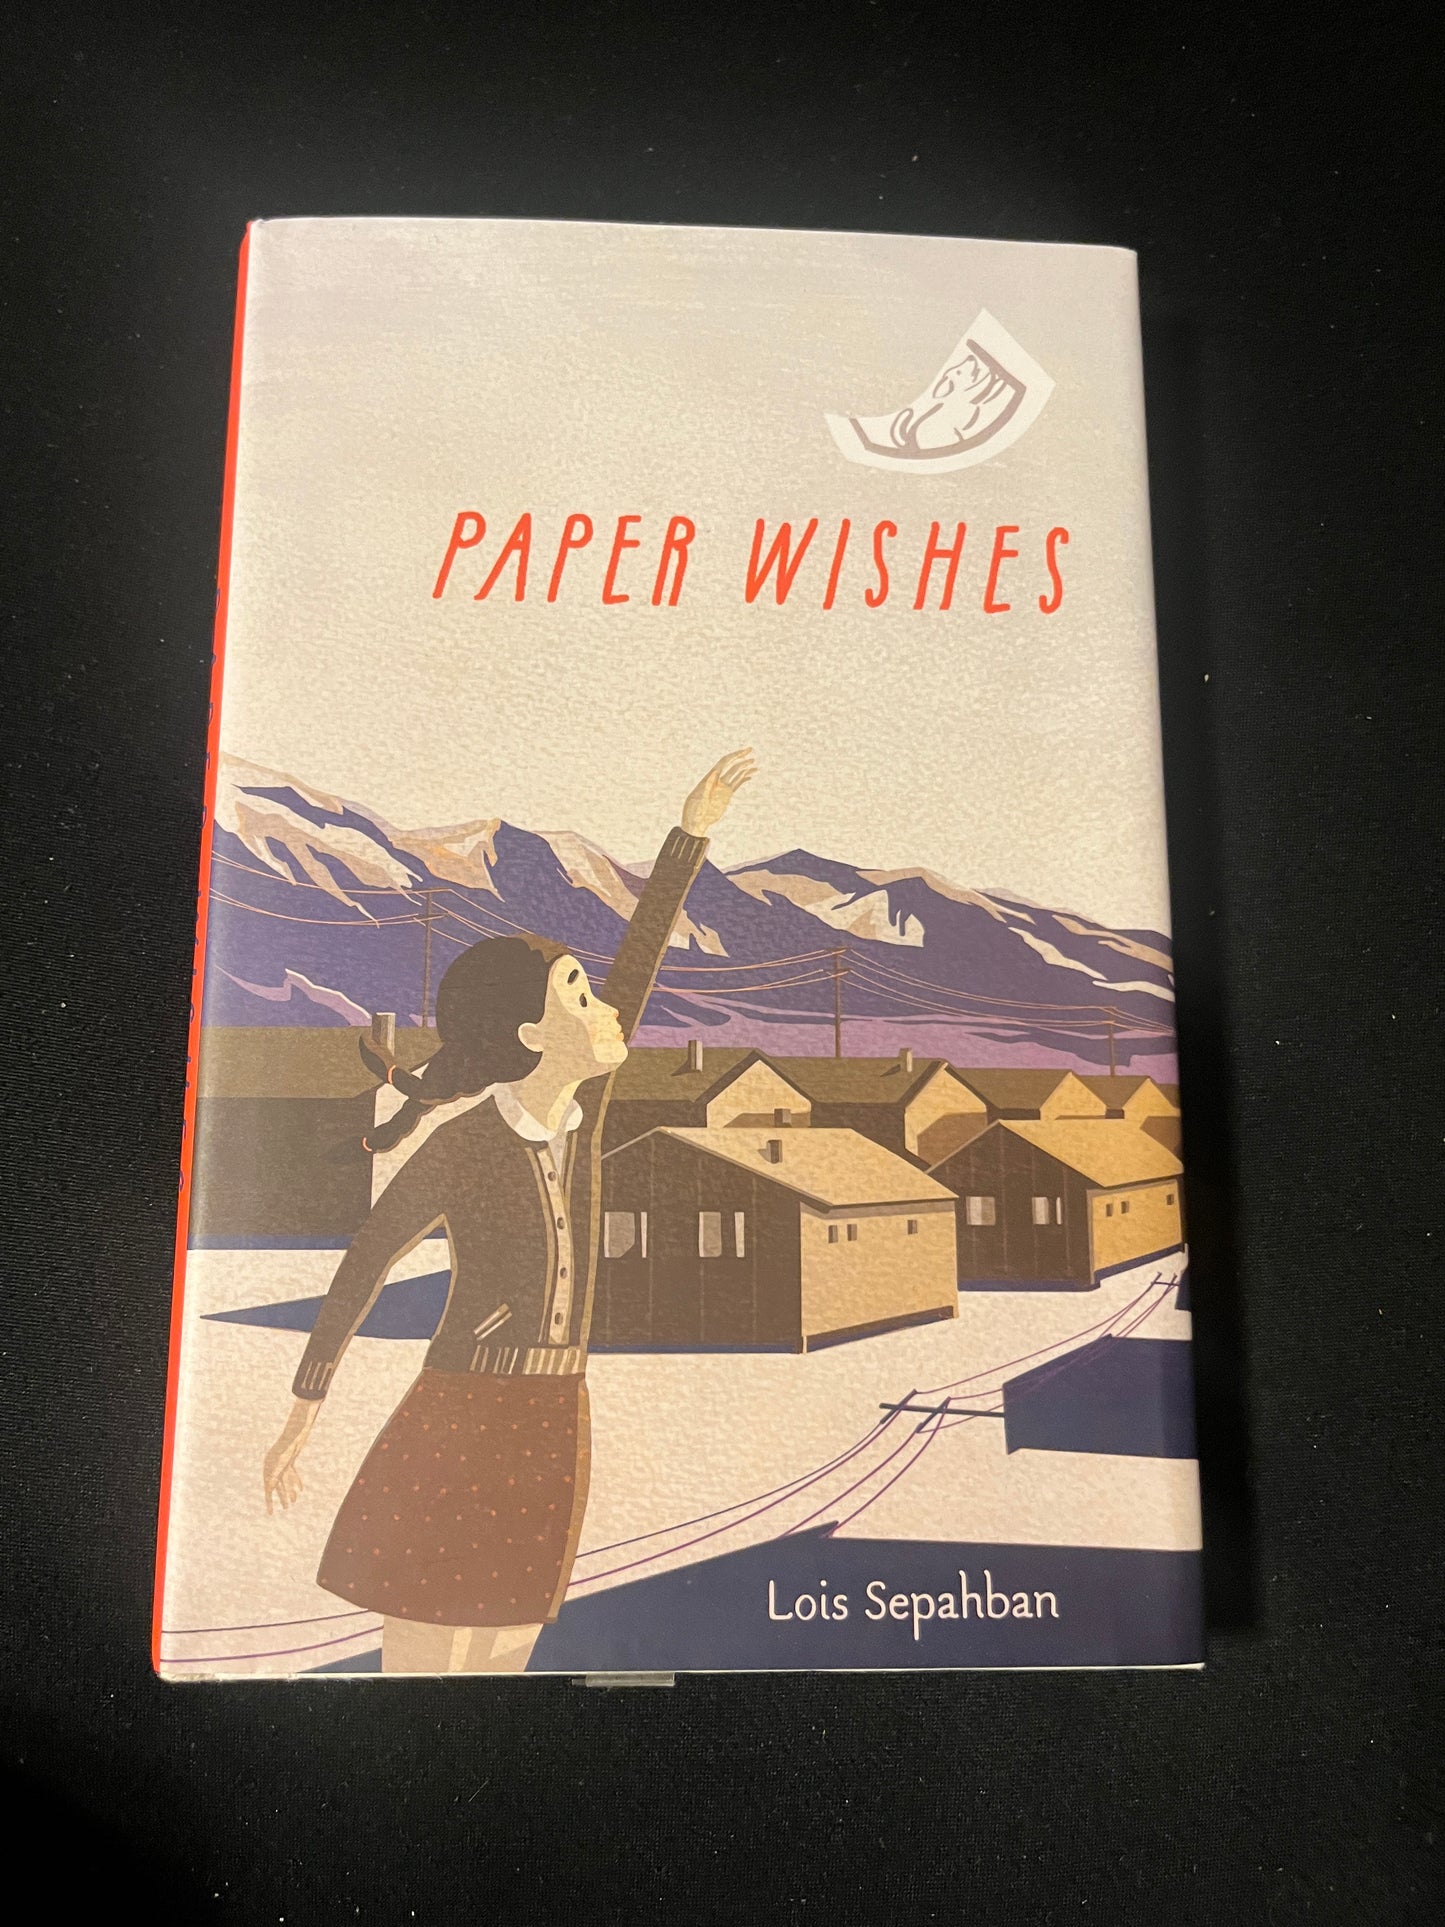 PAPER WISHES by Lois Sepahban